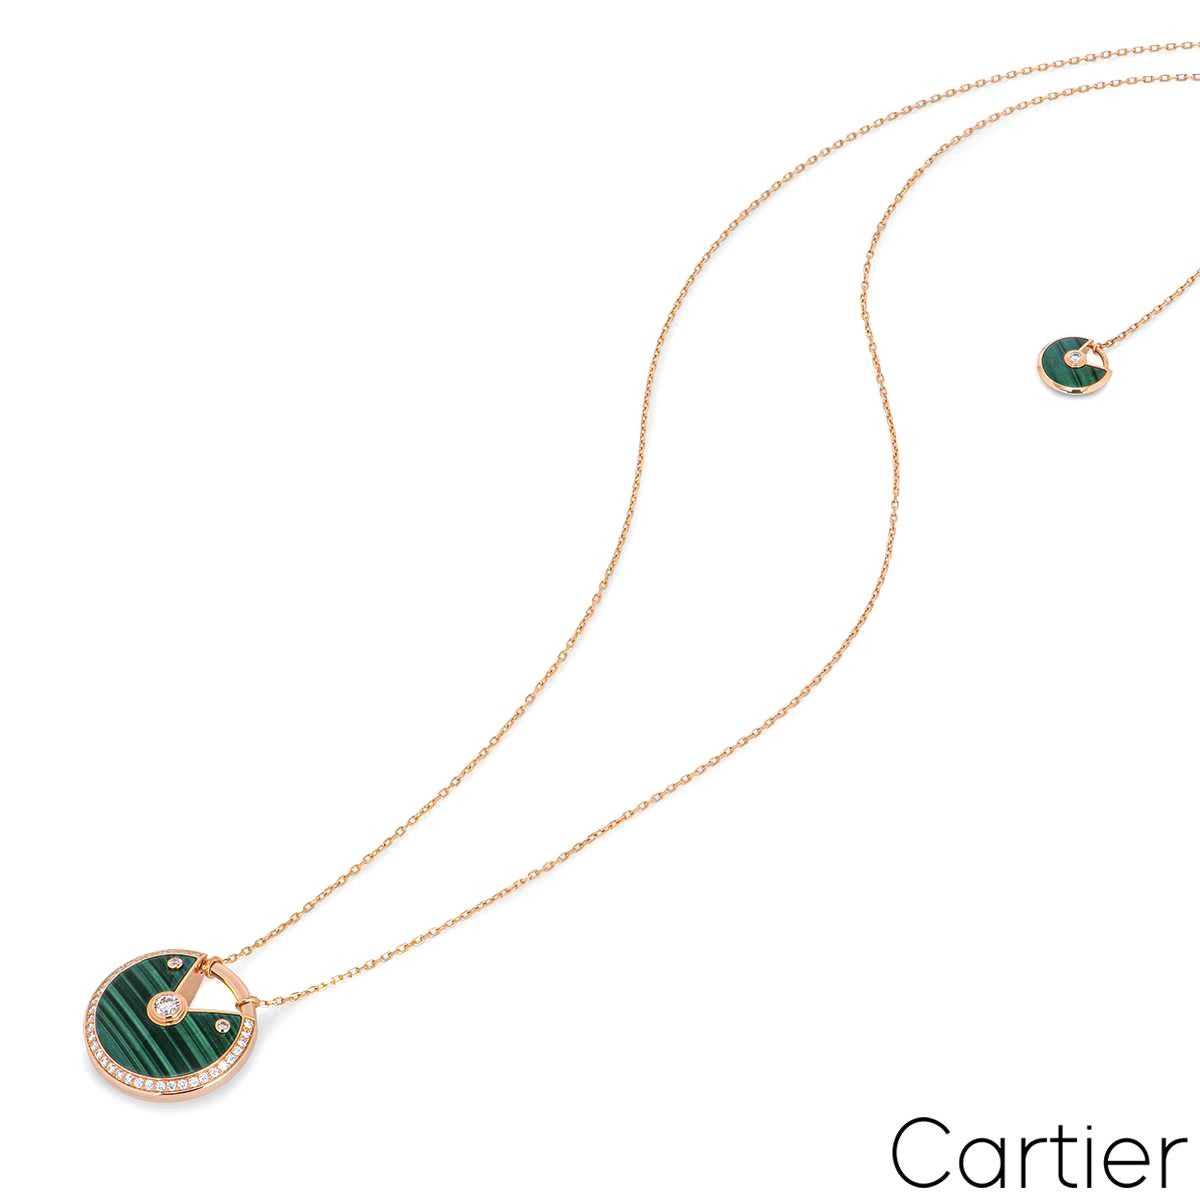 taylor swift cartier necklace